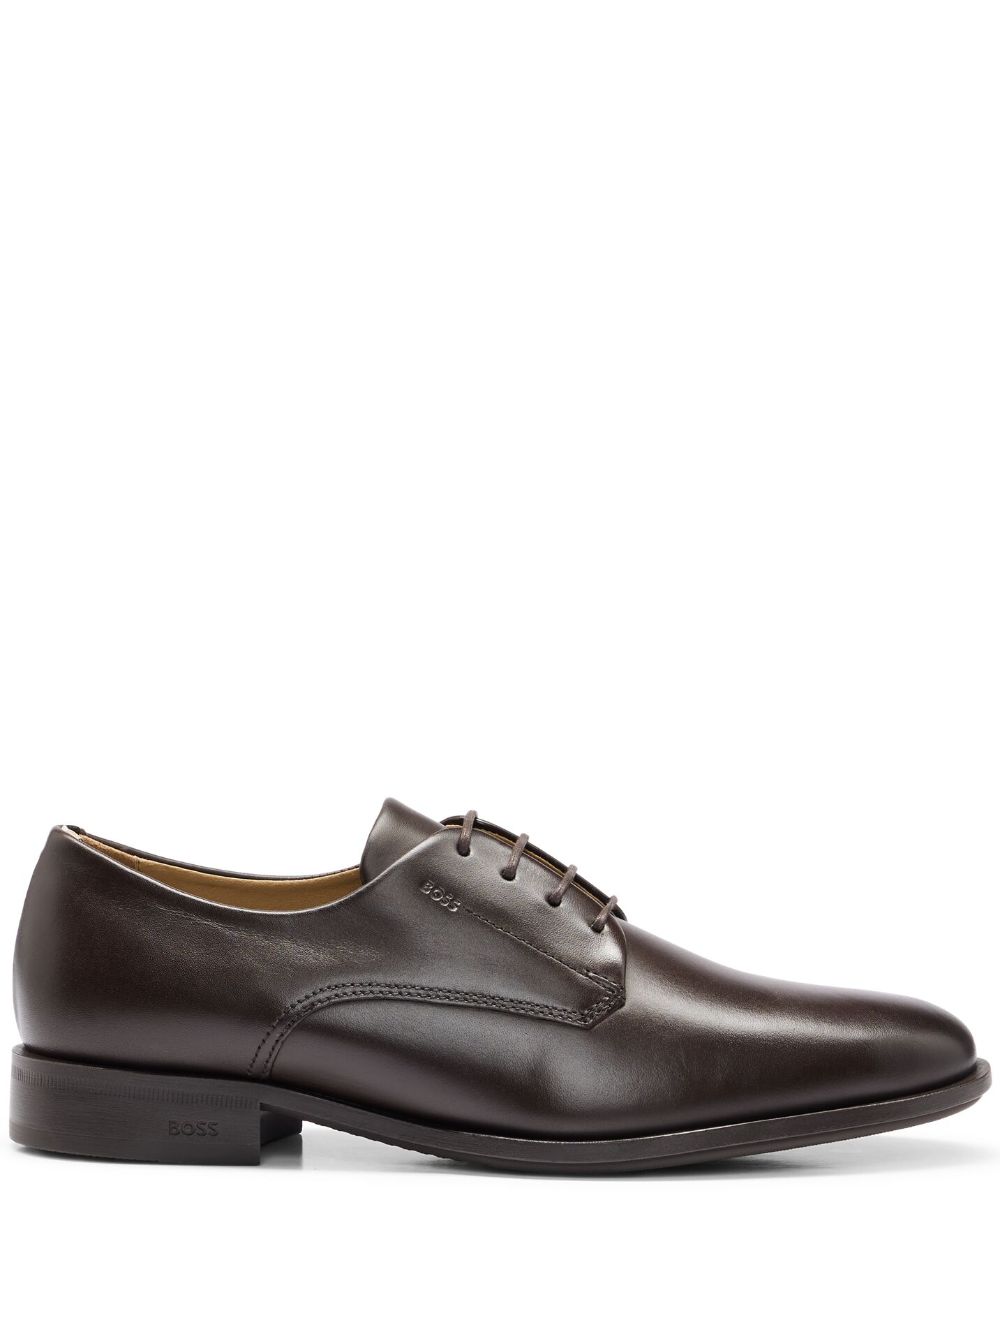 BOSS almond-toe leather derby shoes - Brown von BOSS